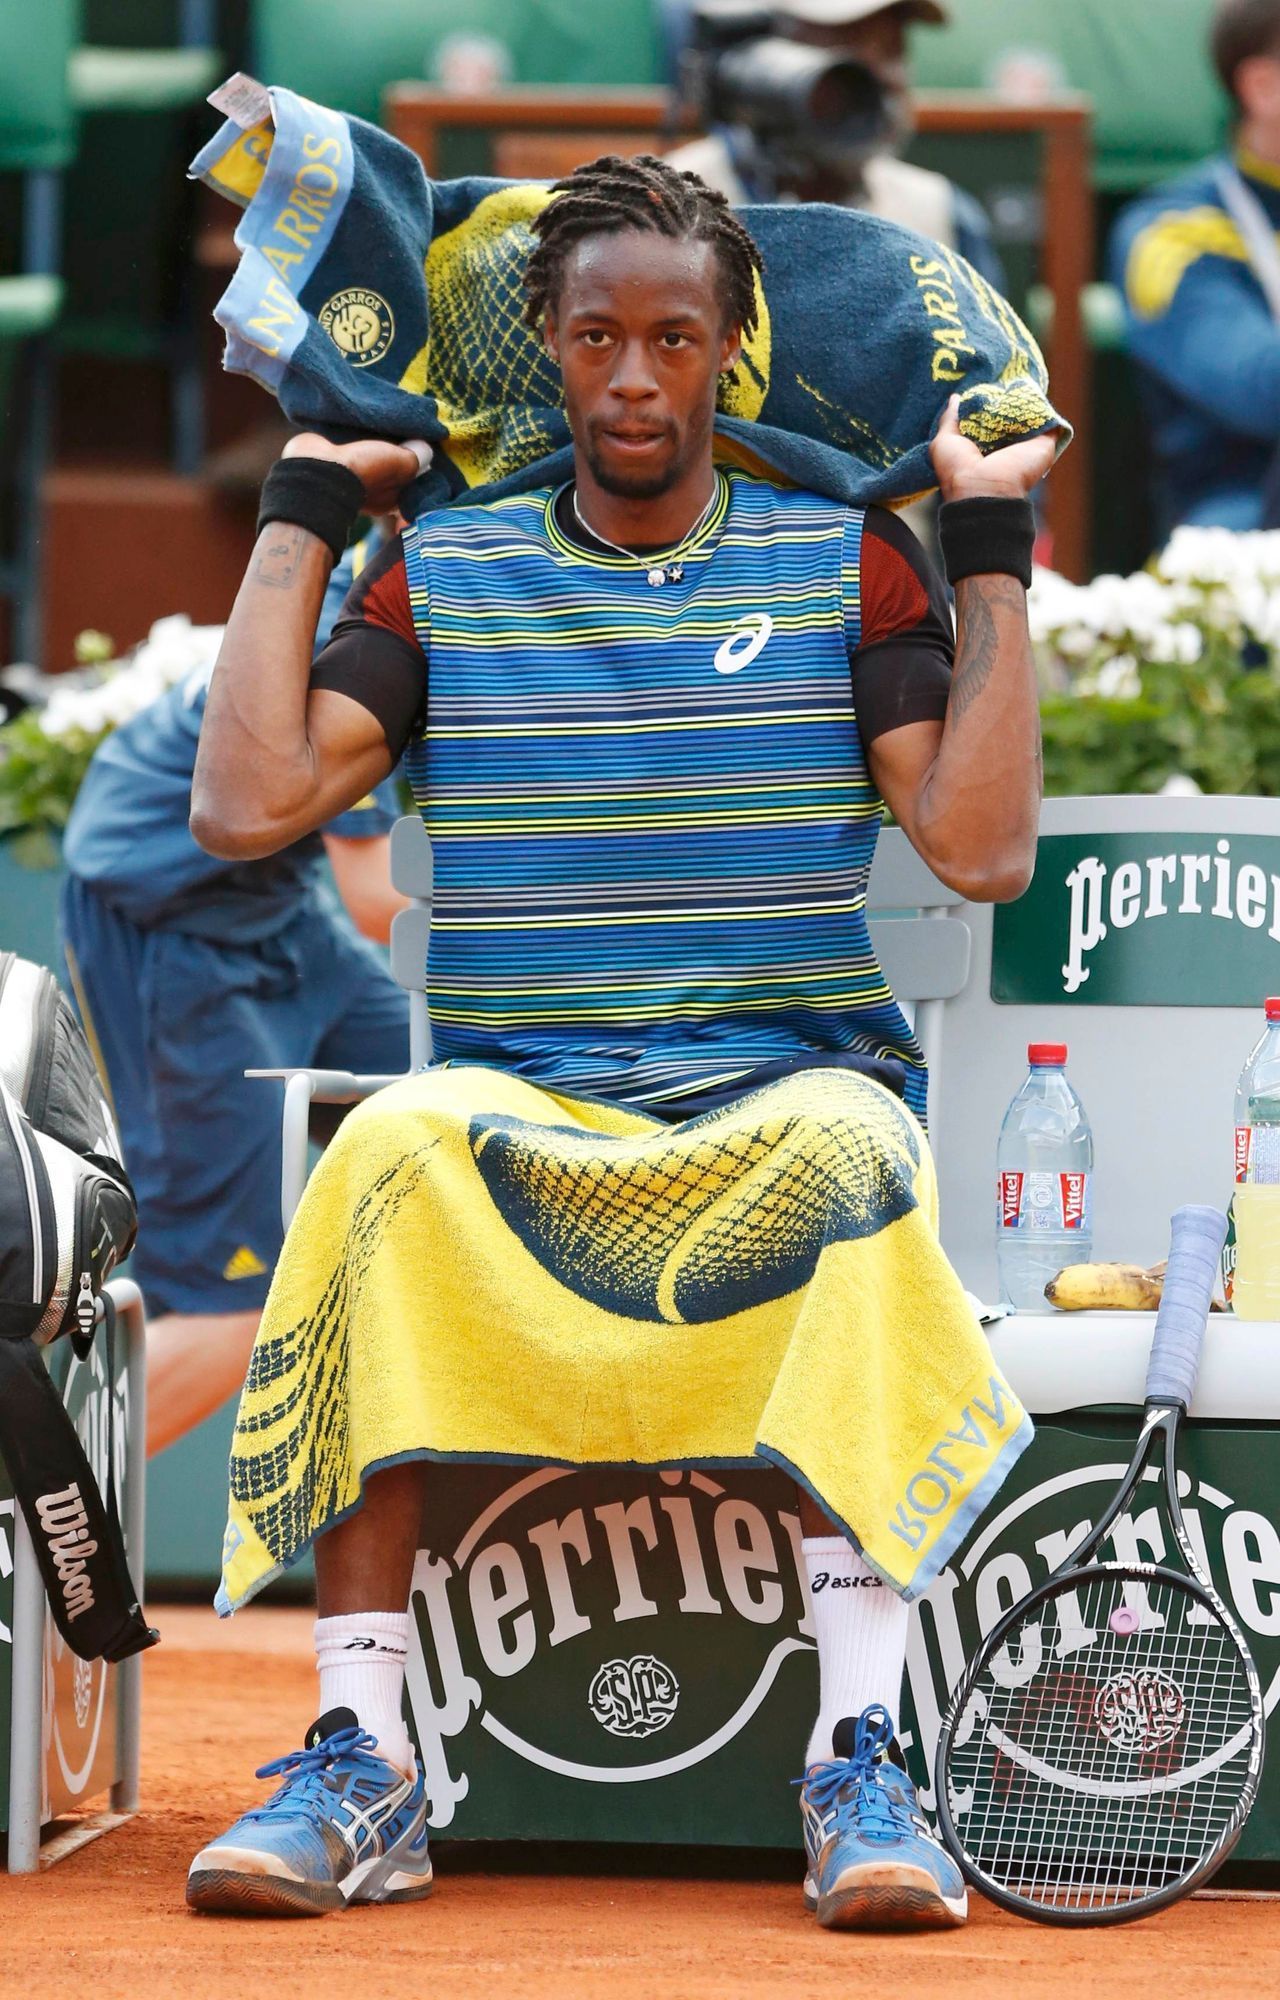 Gael Monfils na French Open 2013